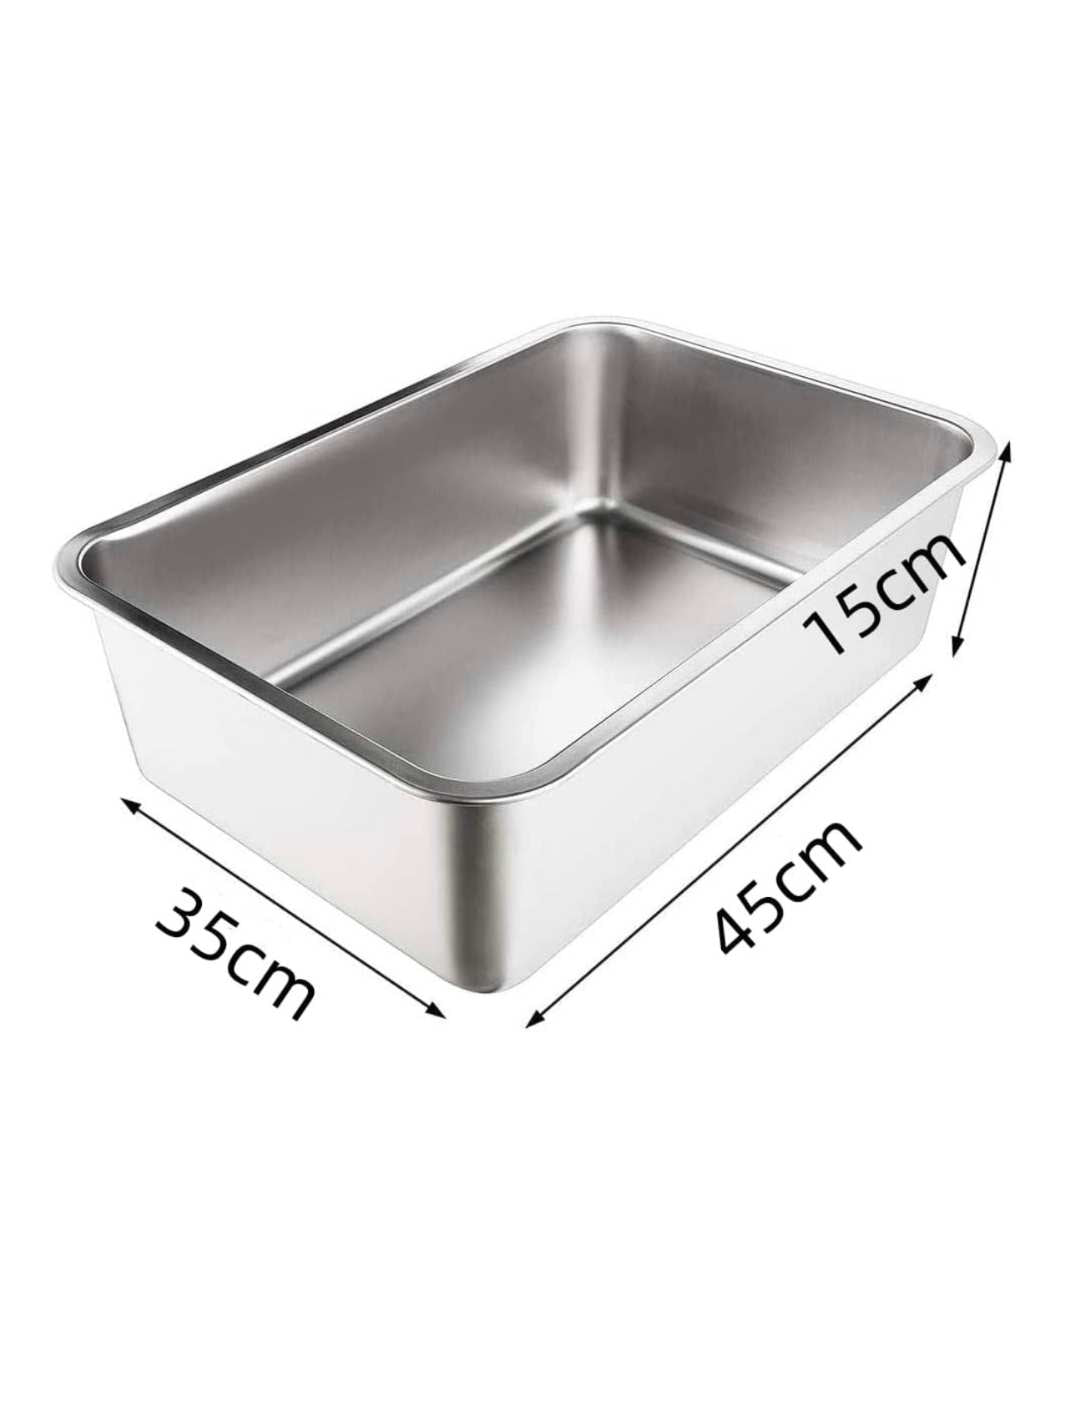 Stainless Steel Cat Litter Tray - Suitable for all Cats and Kittens